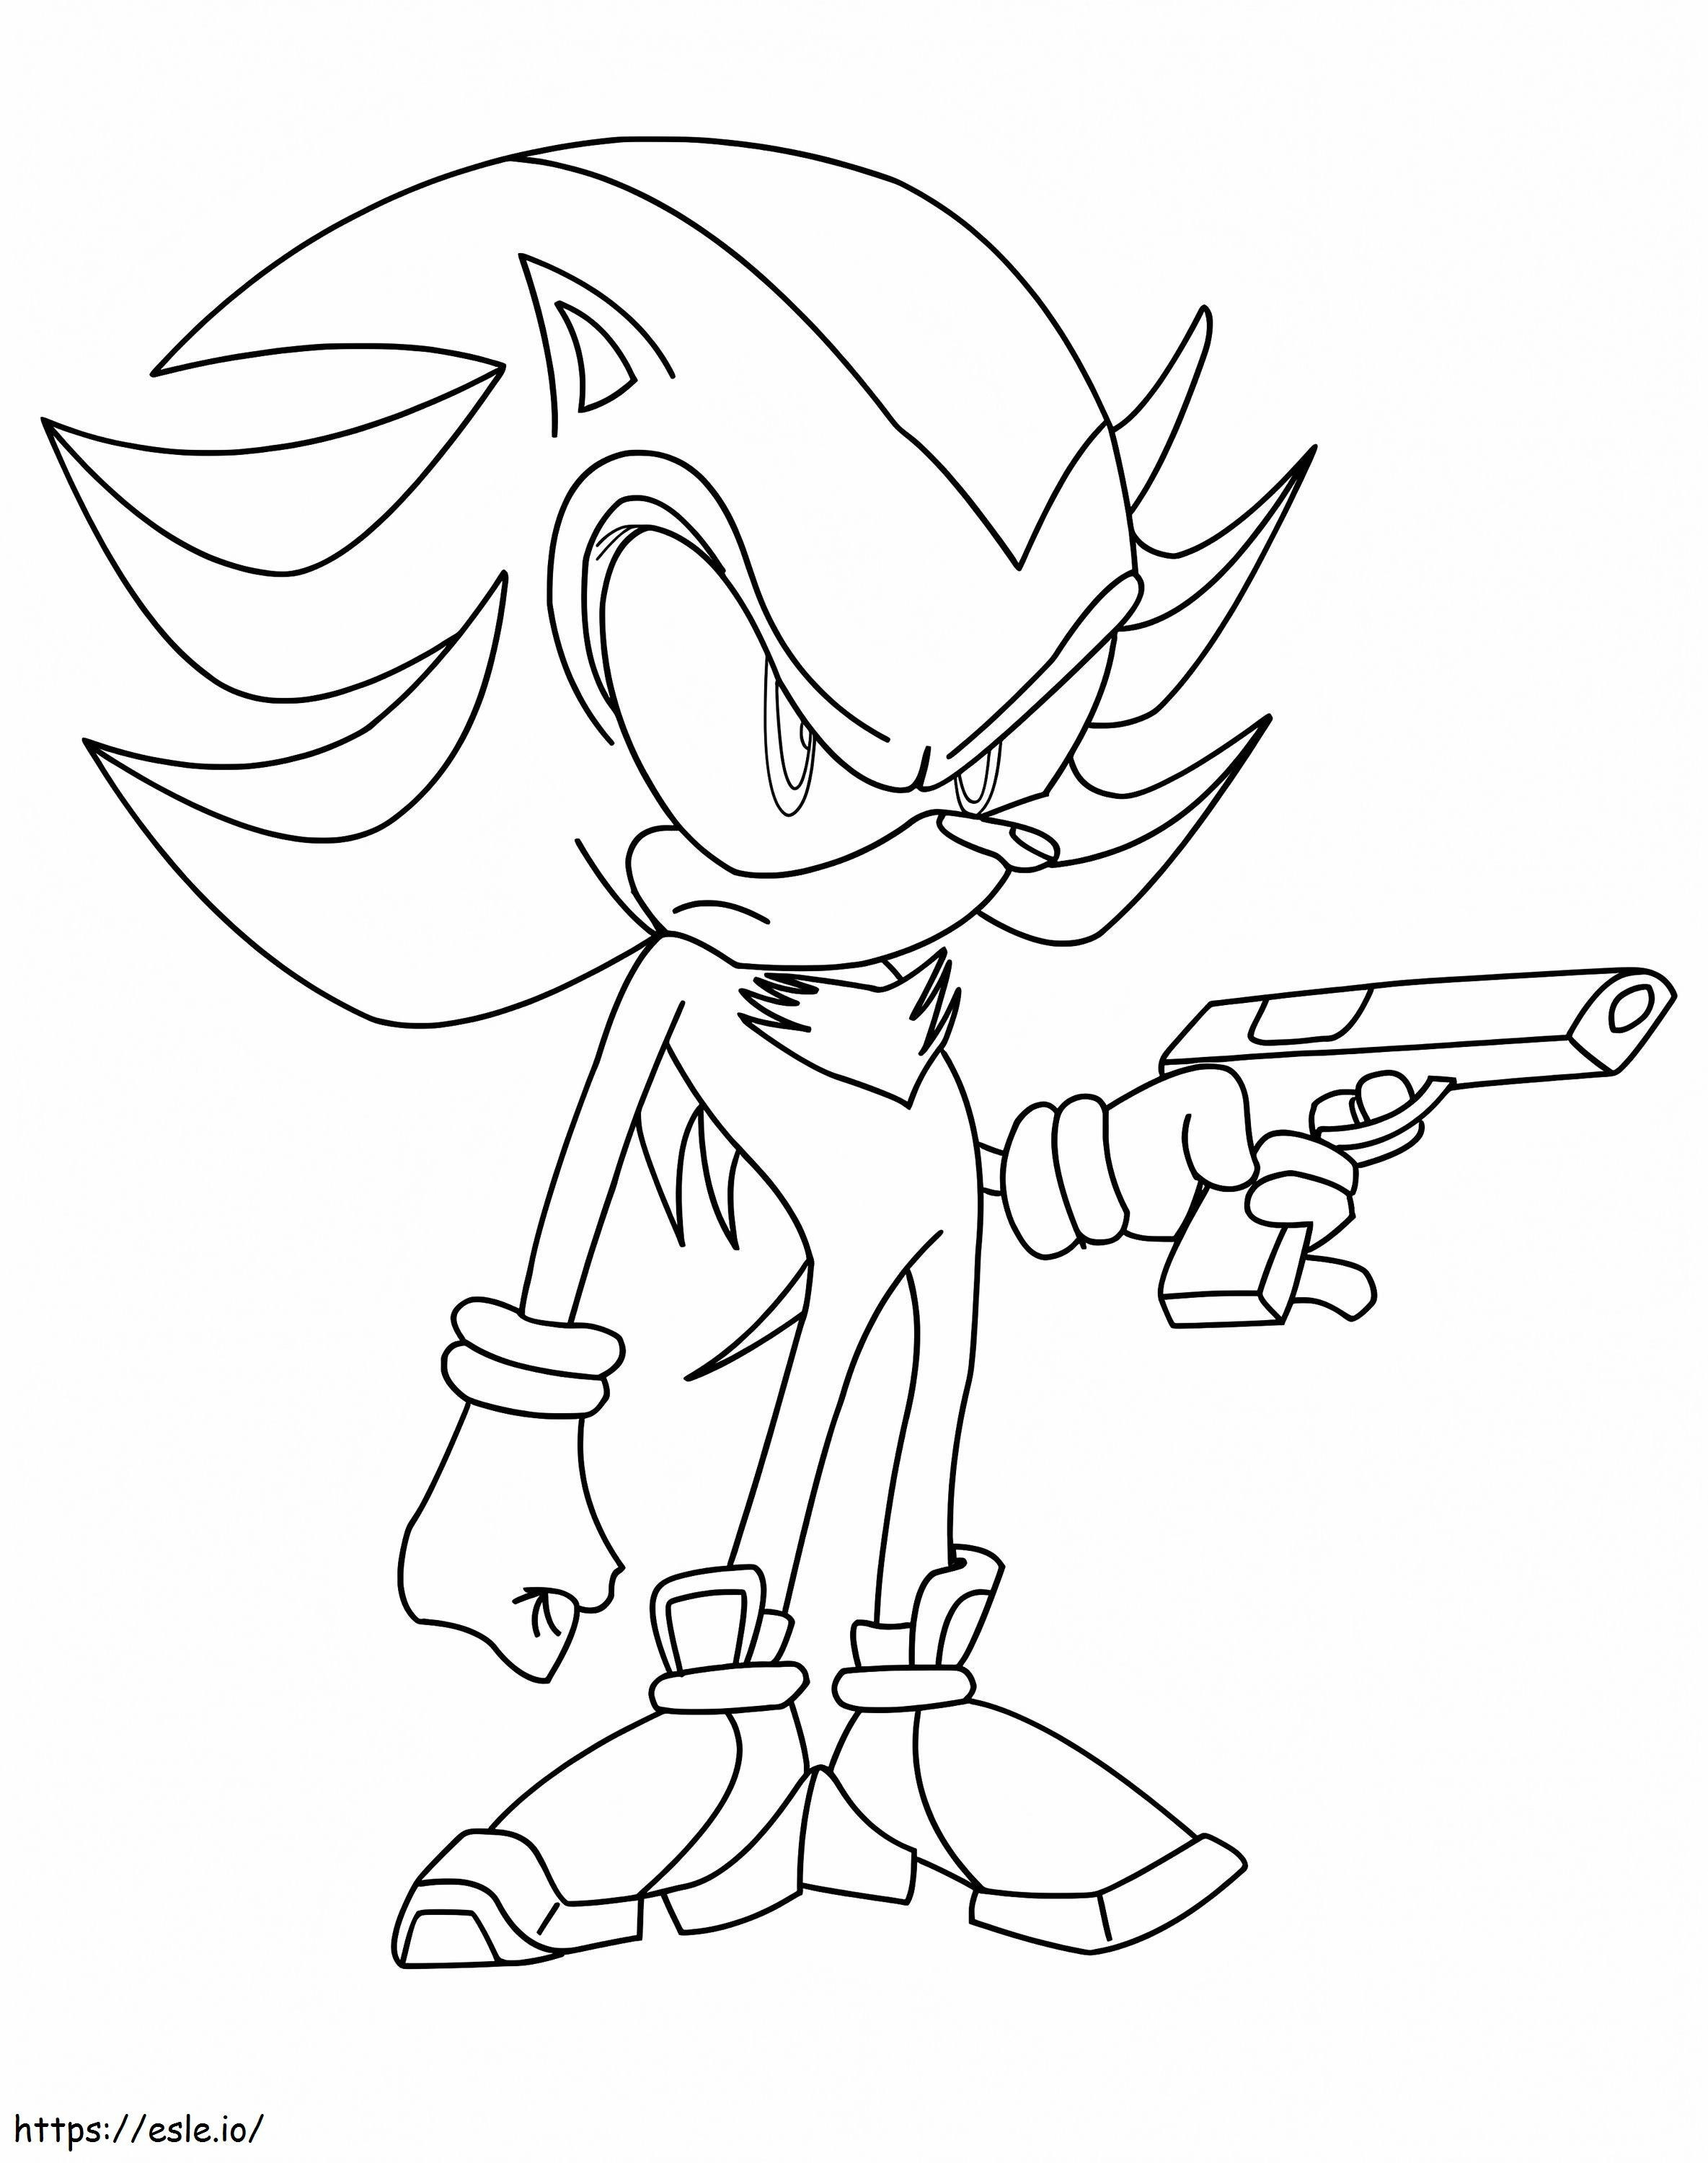 Shadow With A Gun coloring page